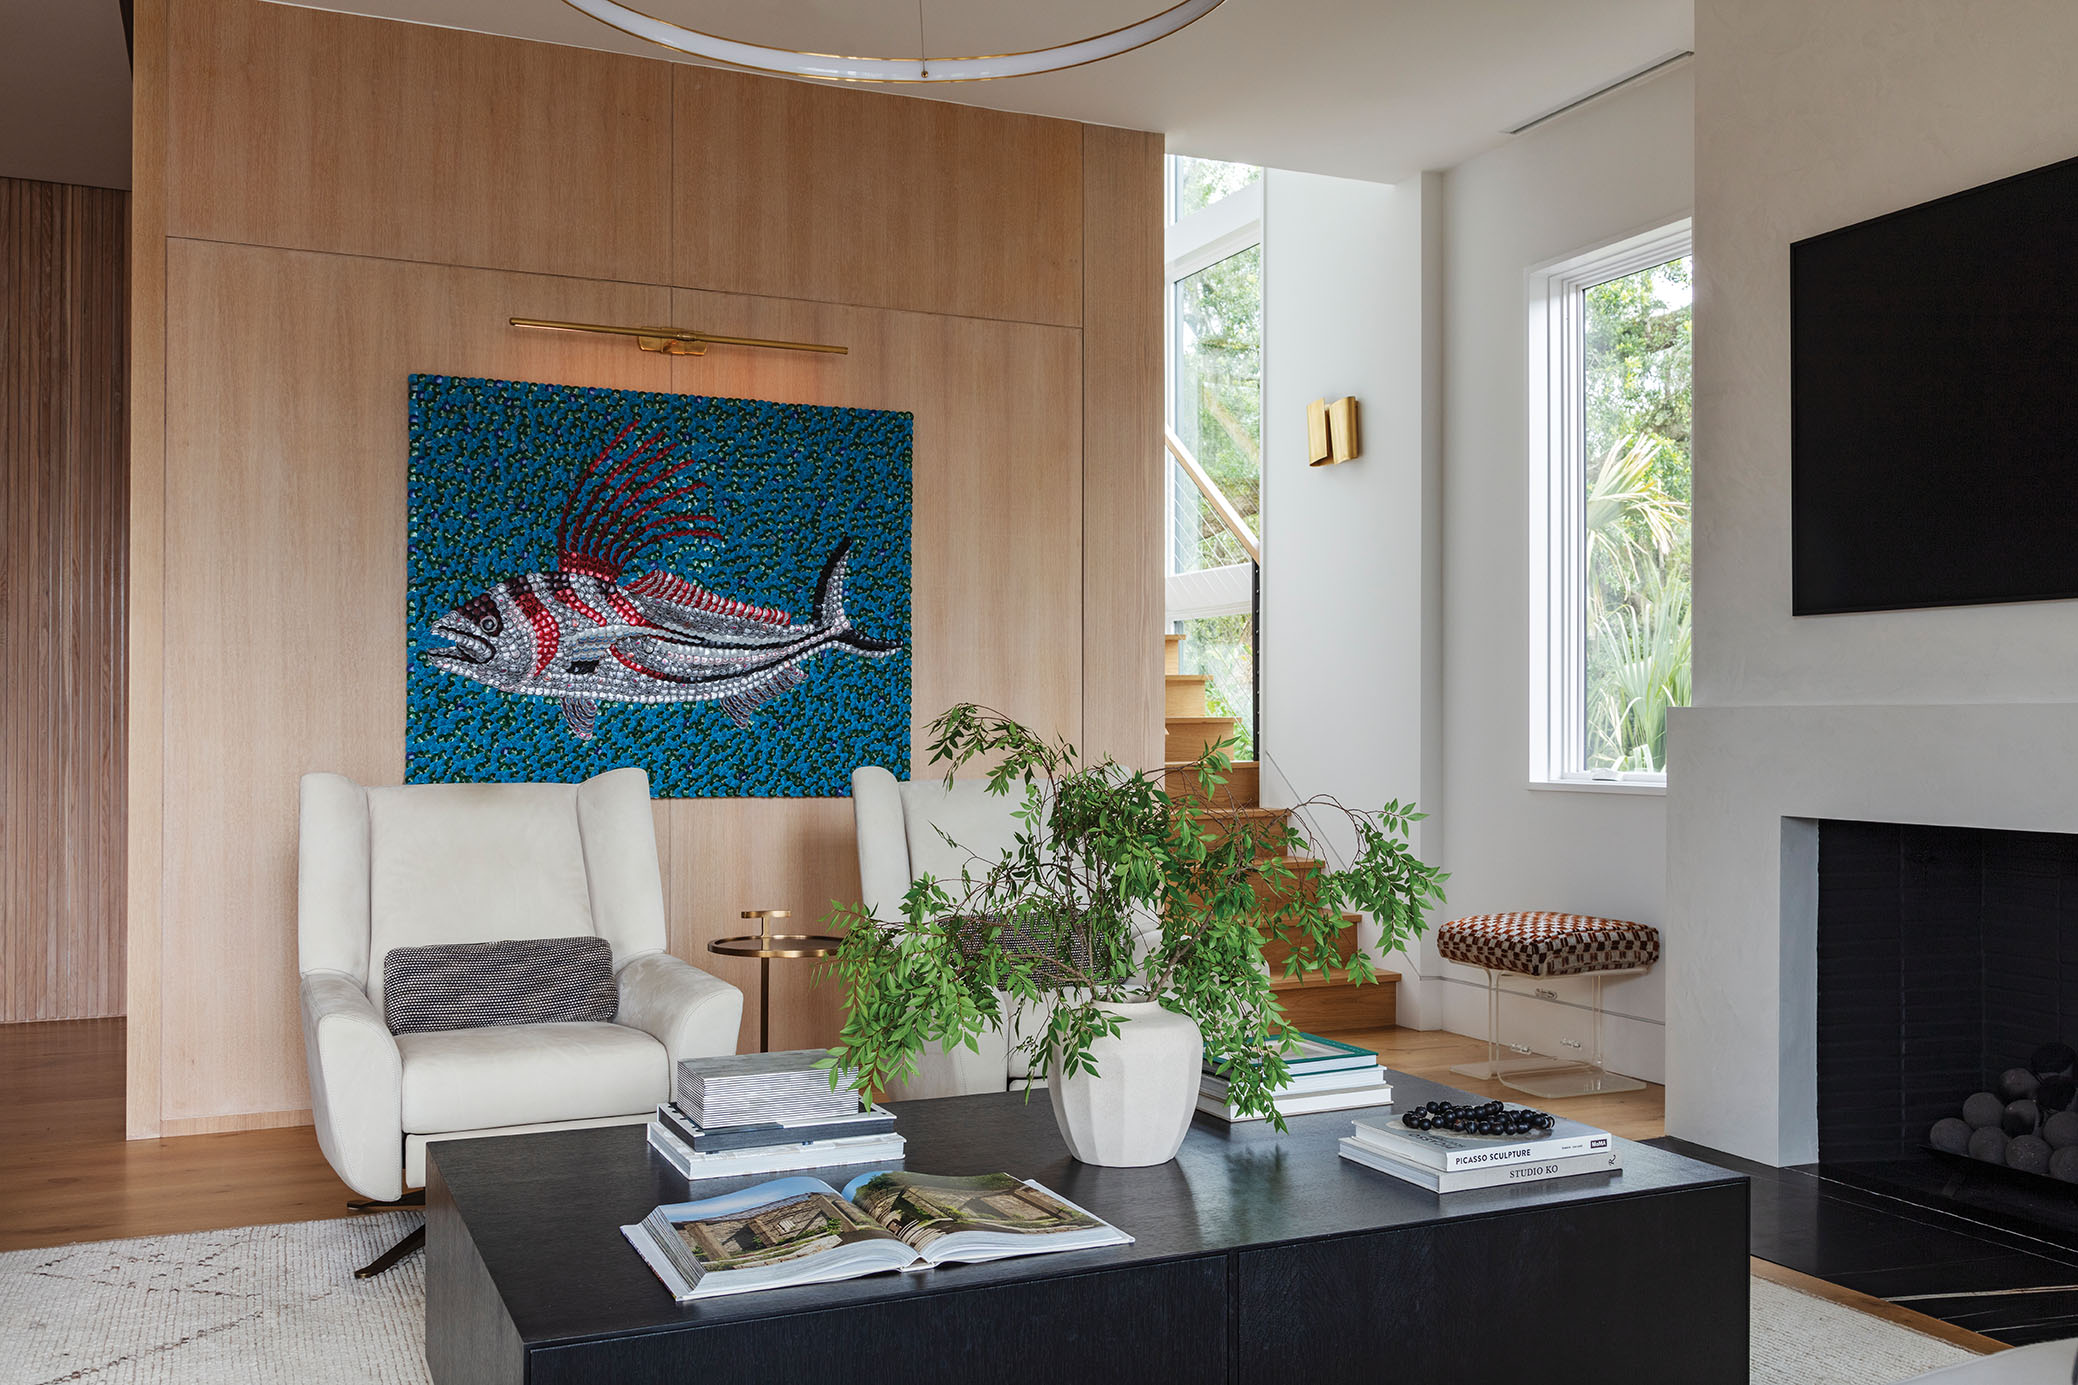 Pops of color come from the couple’s art collection, including Molly B. Right’s Roosterfish bottle-cap painting (above), and antique pieces, such as the vintage Lucite stools flanking the fireplace.